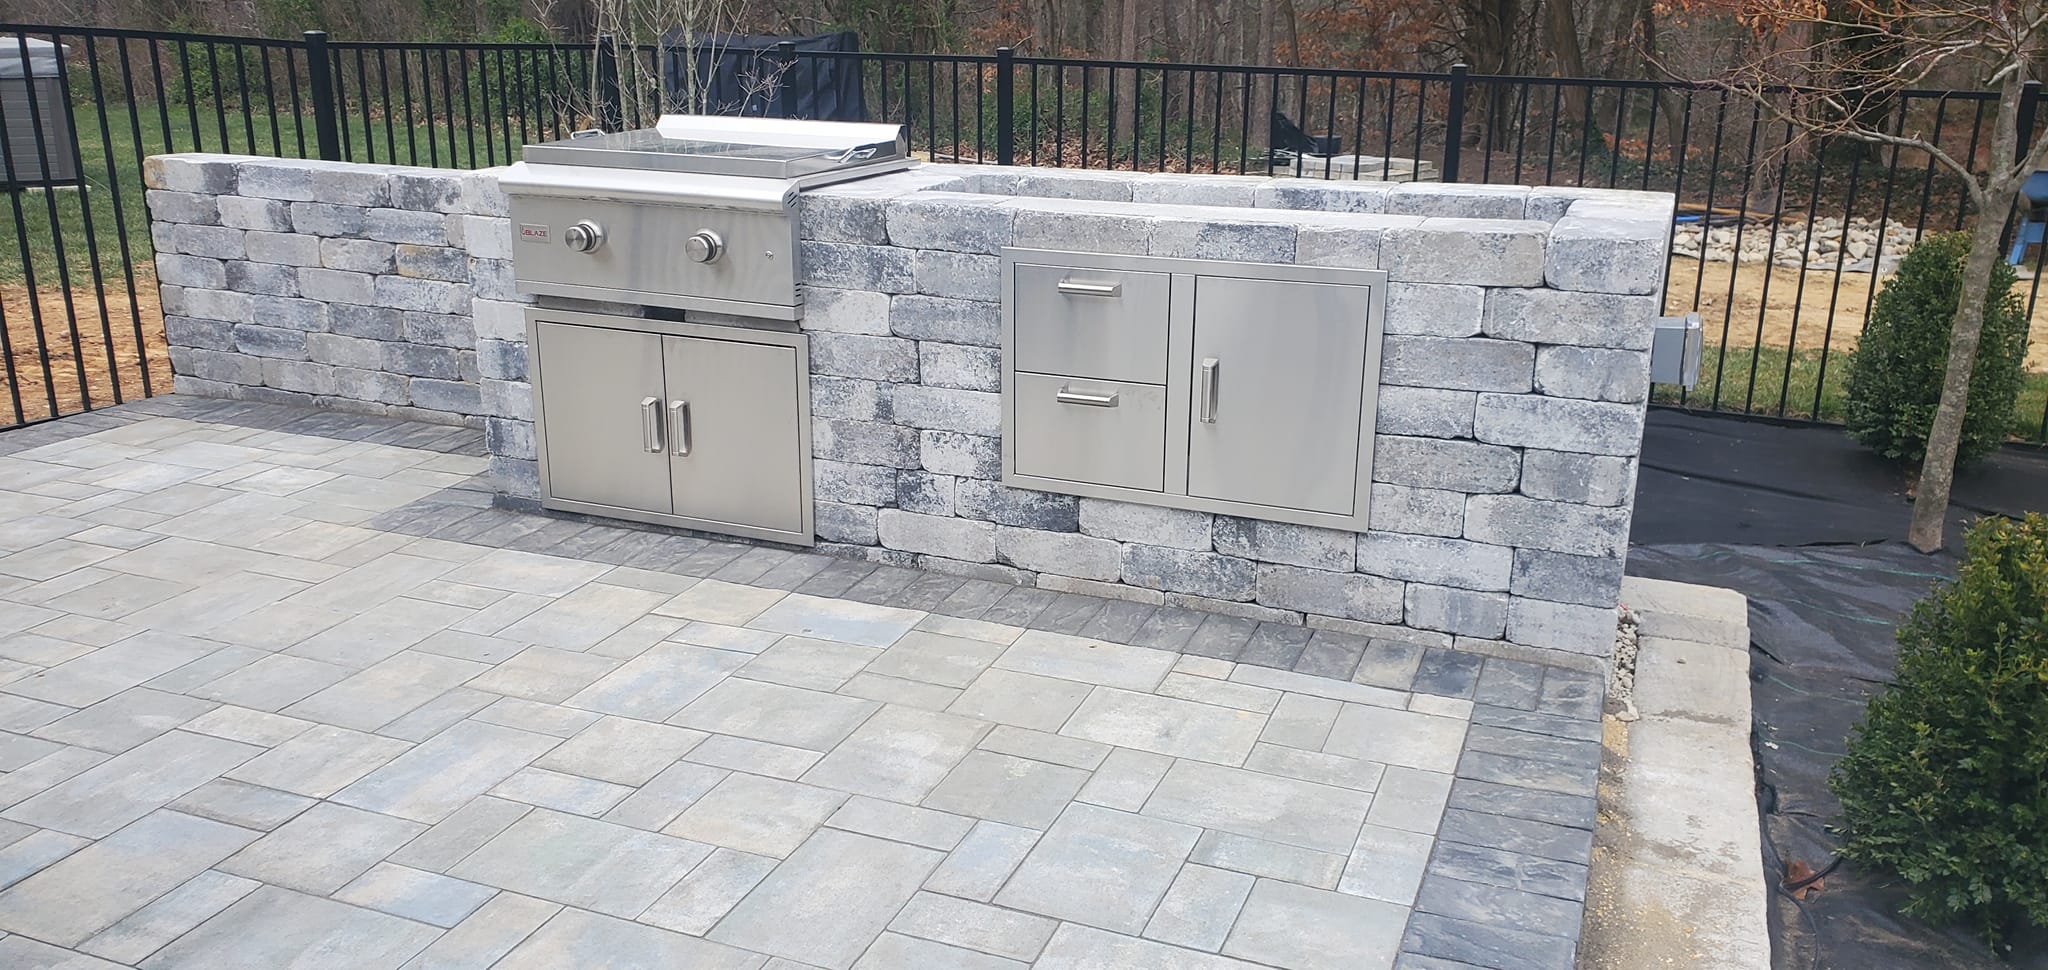 Adam's Lawn & Landscaping Prince Frederick Maryland Paver Patio Kitchen